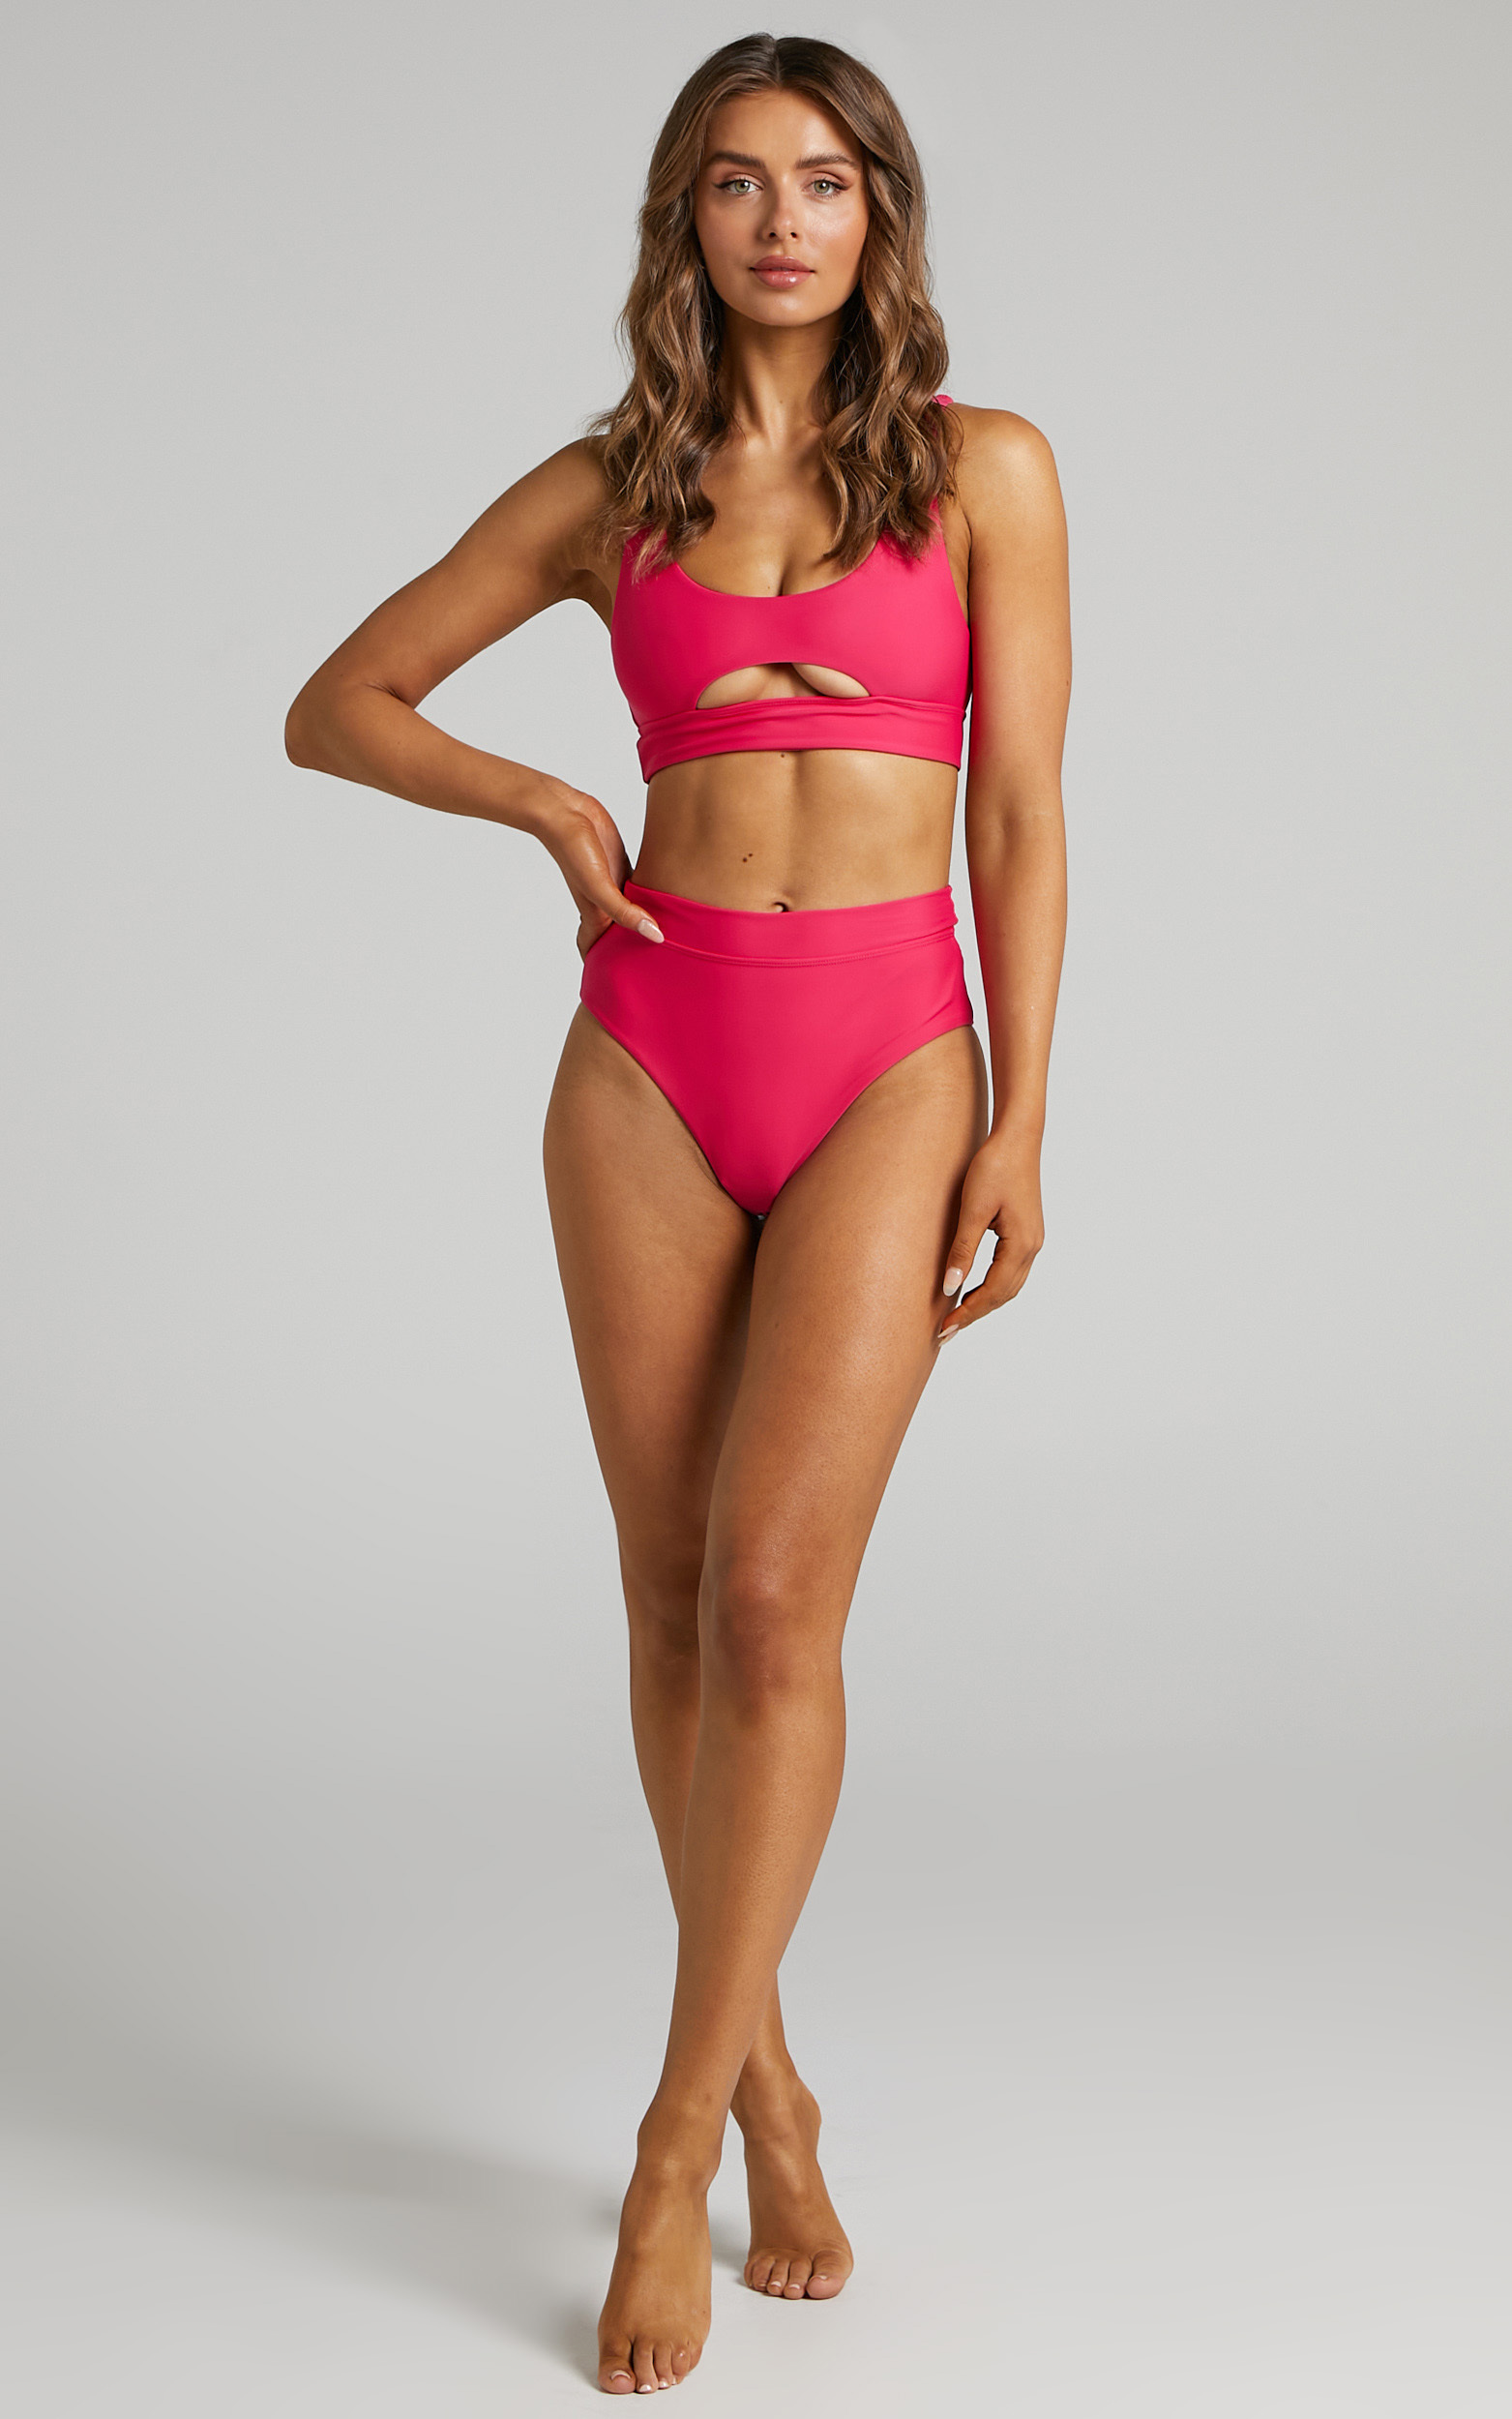 Recycled Nylon Bobbi High Waisted Bottoms in Hot Pink - 06, PNK1, hi-res image number null